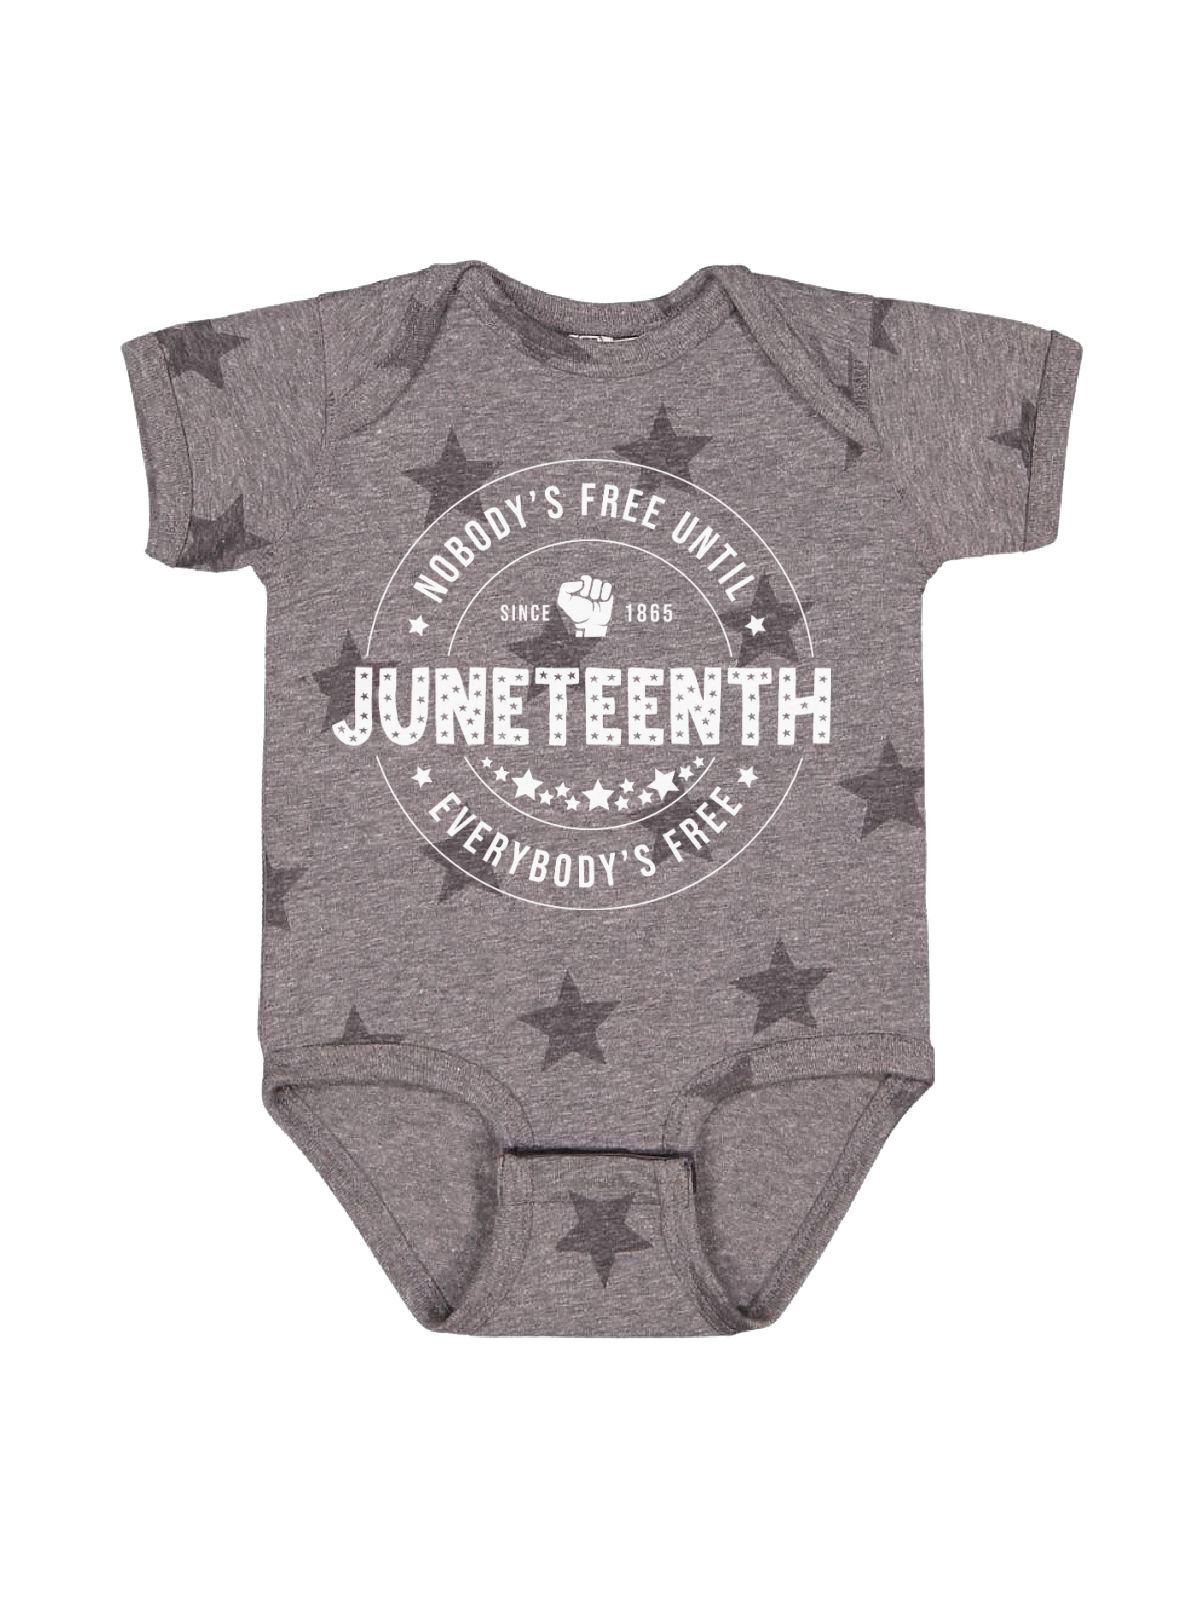 Nobody's Free Until Everybody's Free Infant Juneteenth Bodysuit in Gray